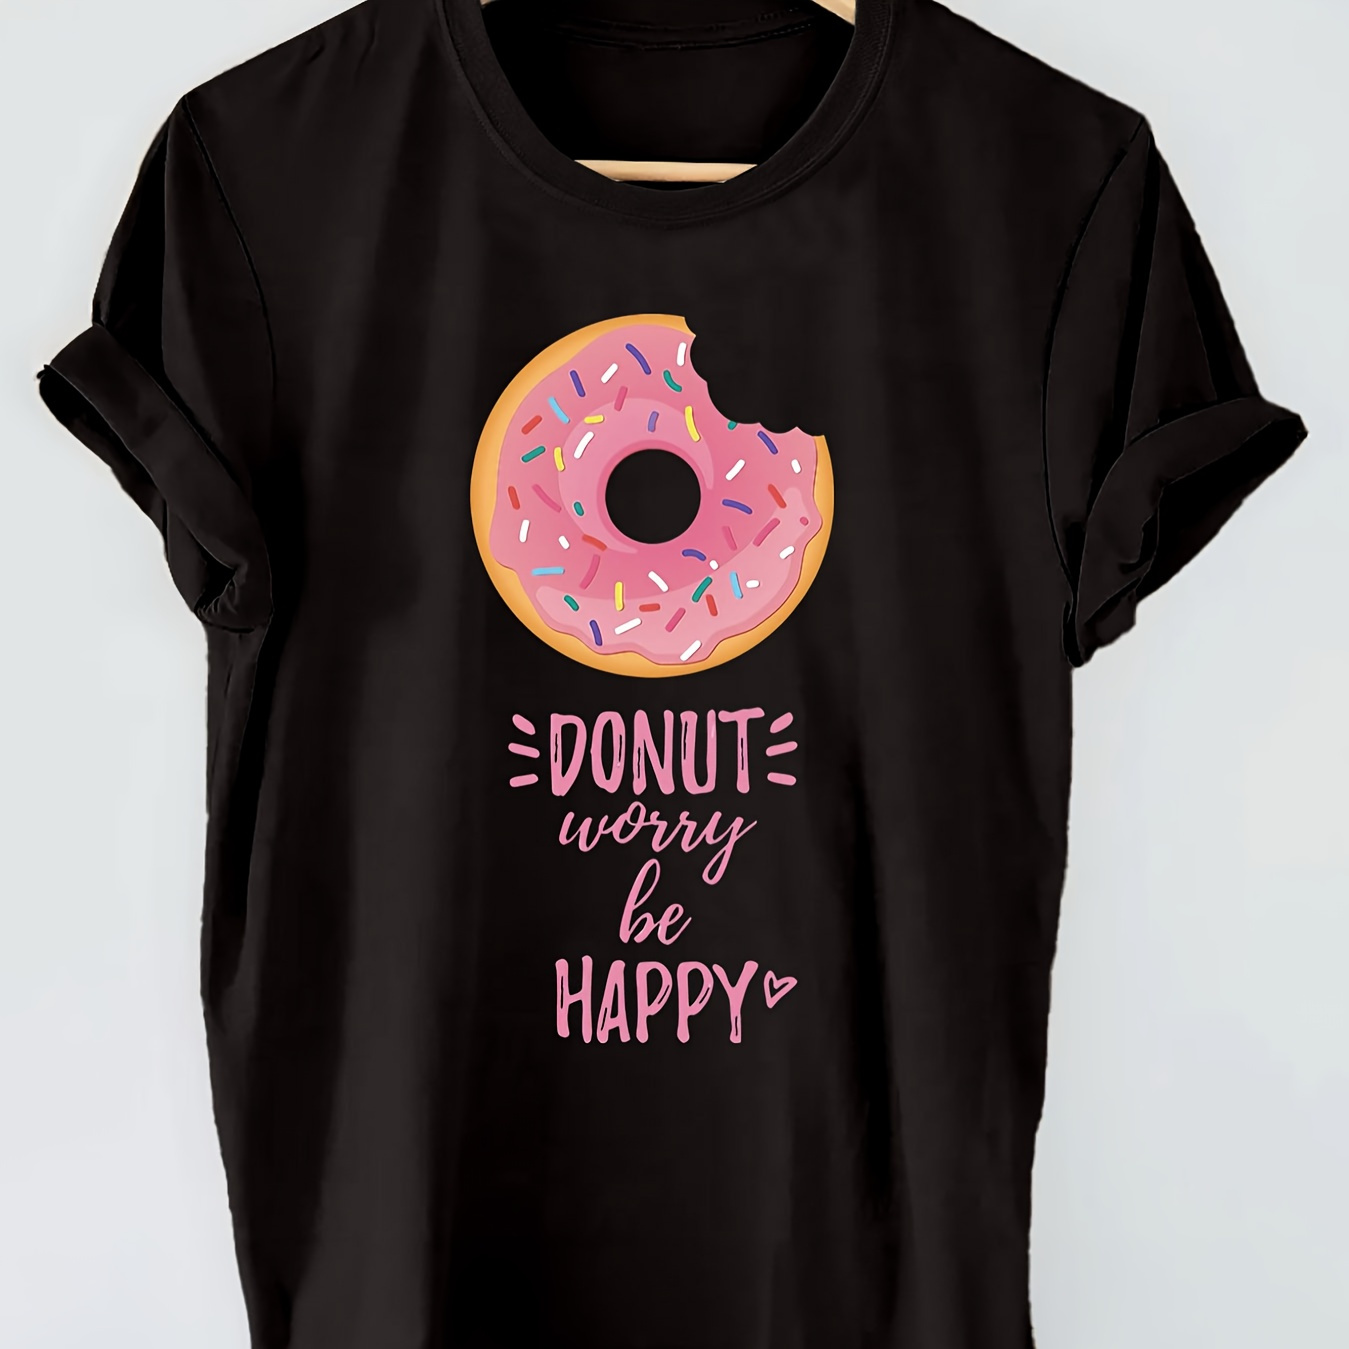 

Letter & Donuts Graphic Print T-shirt, Short Sleeve Crew Neck Casual Top For Summer & Spring, Women's Clothing